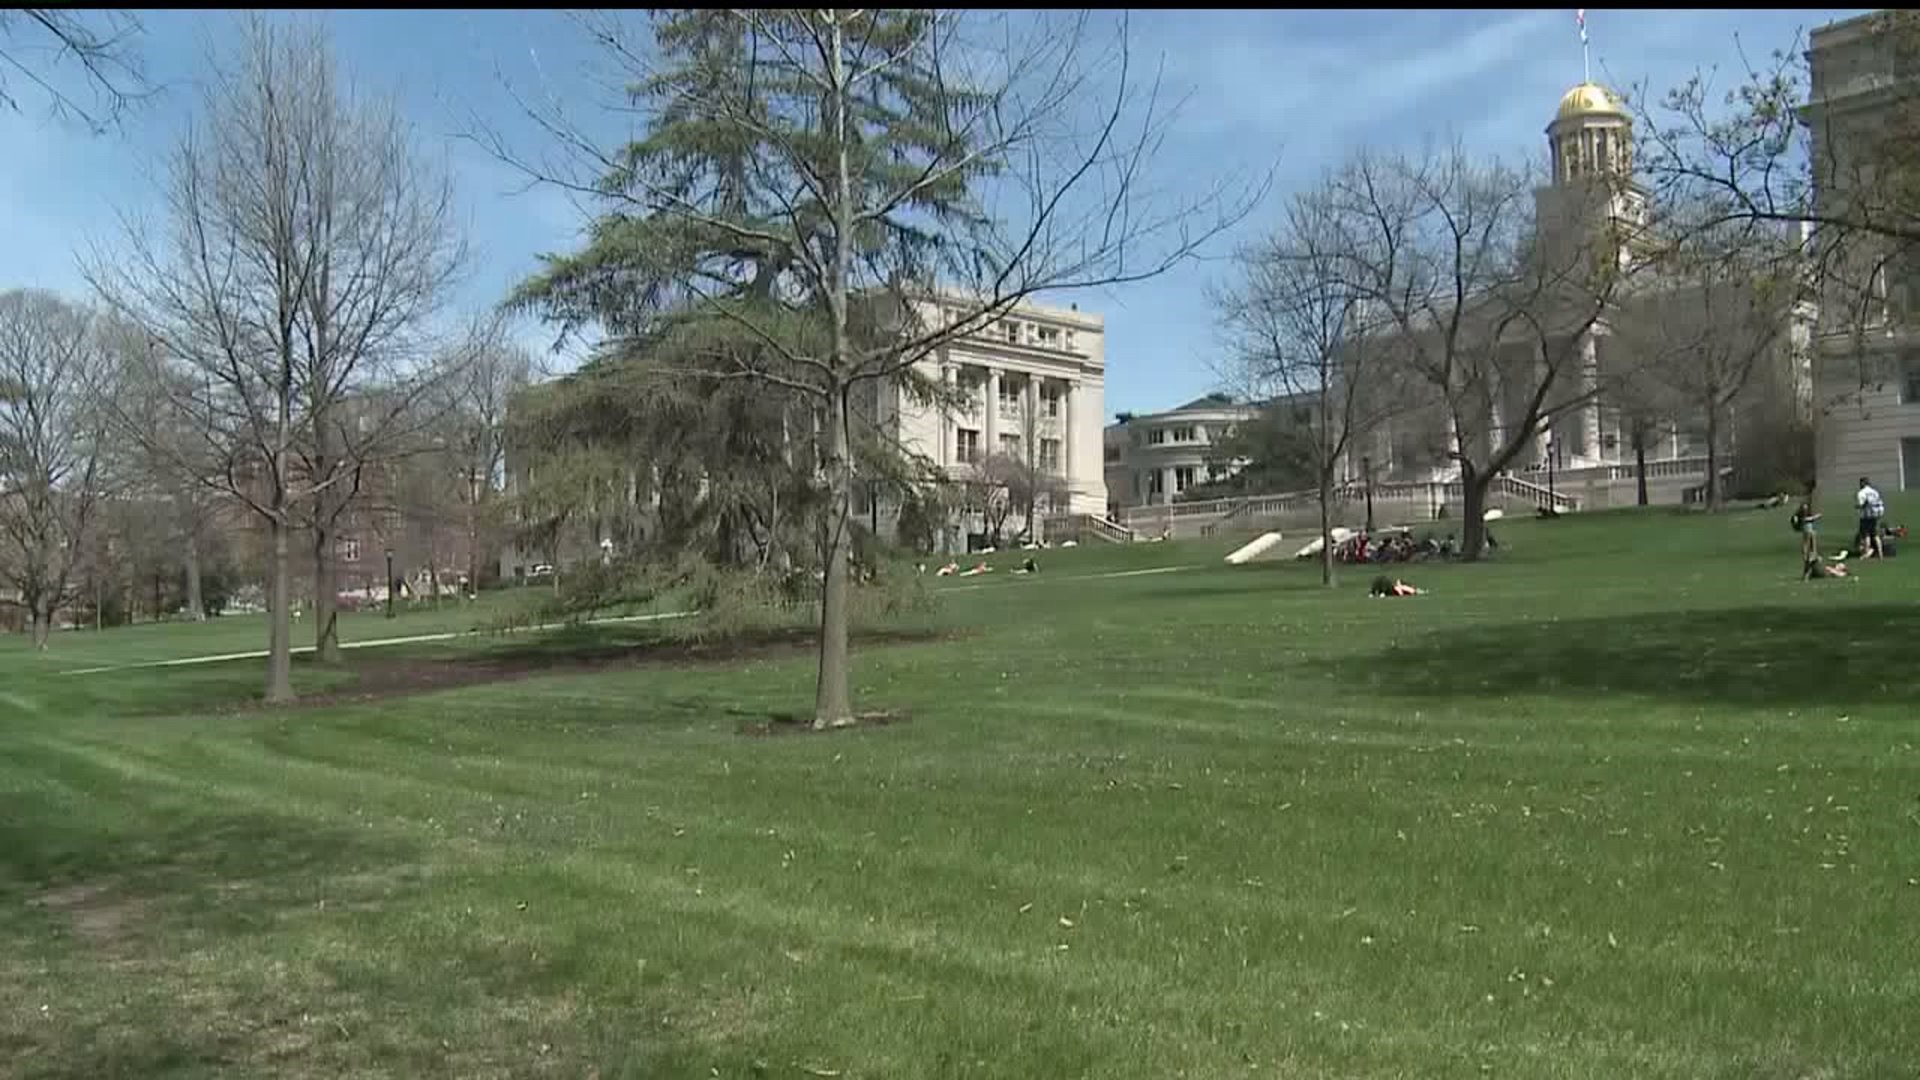 Judge questions U. of Iowa`s response to Christian lawsuit